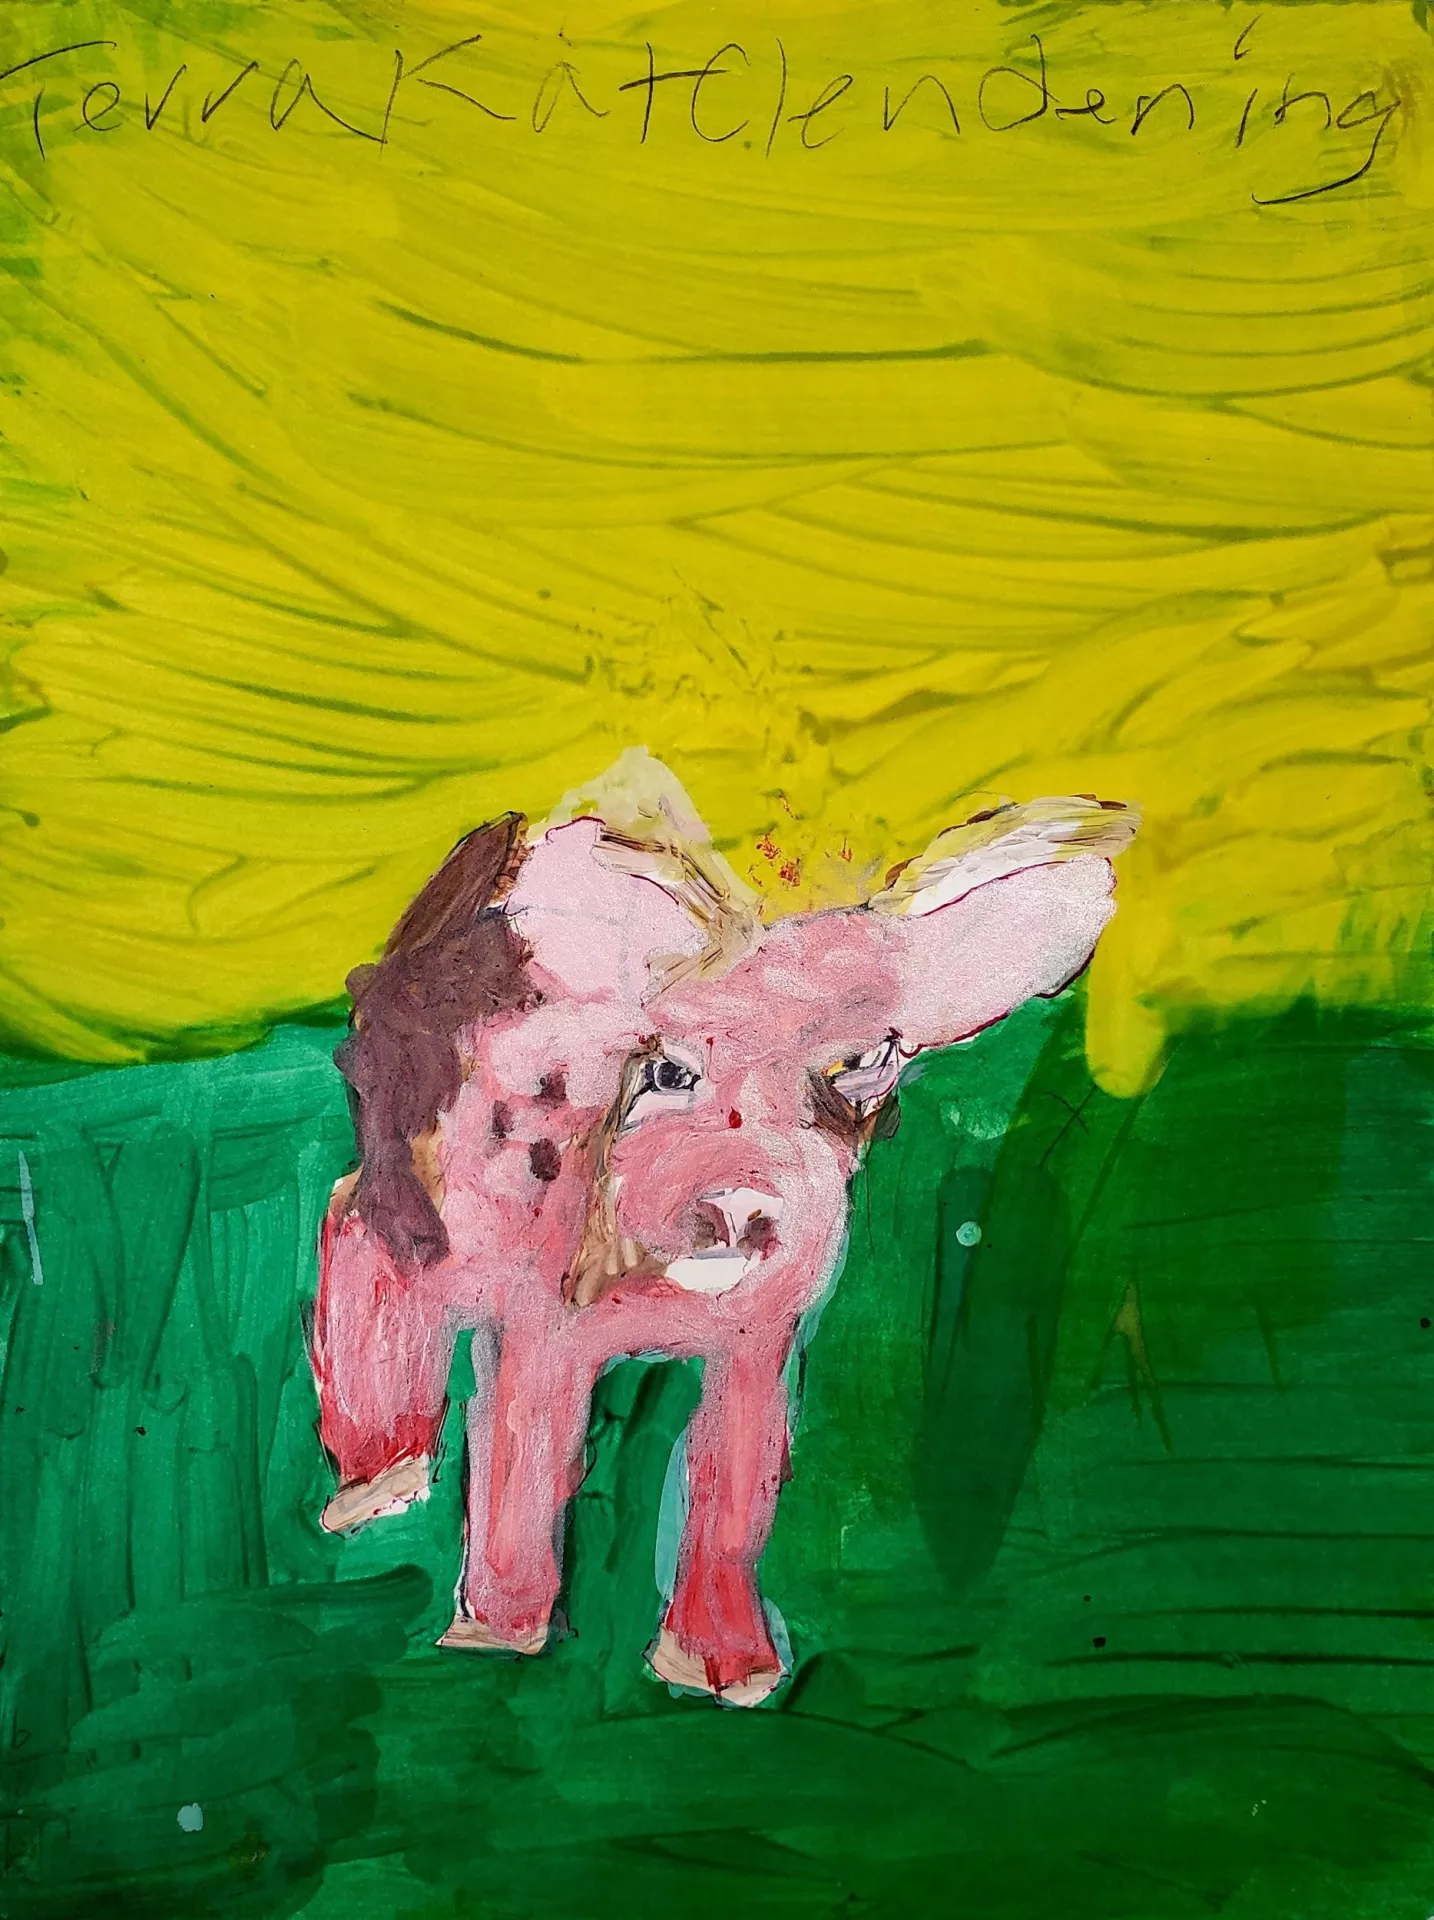 Terra used analogous colors of green and yellow with accent colors of pink and red.  This image depicts a piglet alone in a landscape.  This is an image from her "Pig Book."